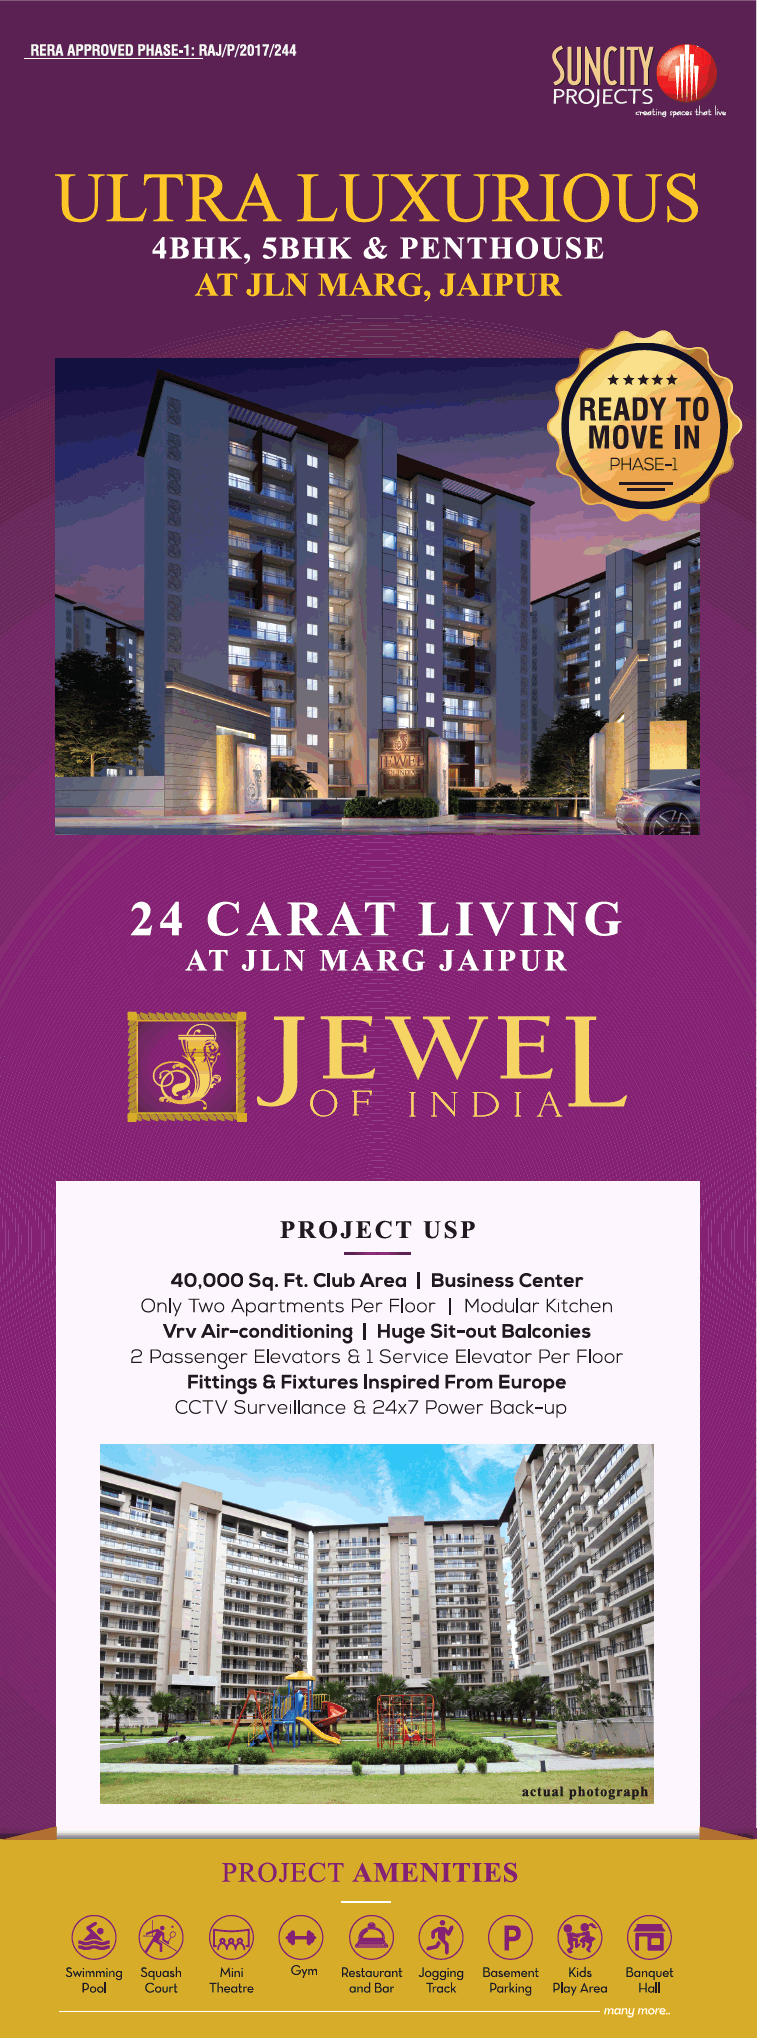 Ultra luxurious  4BHK, 5BHK, and penthouse at Suncity Jewel of India in Jaipur